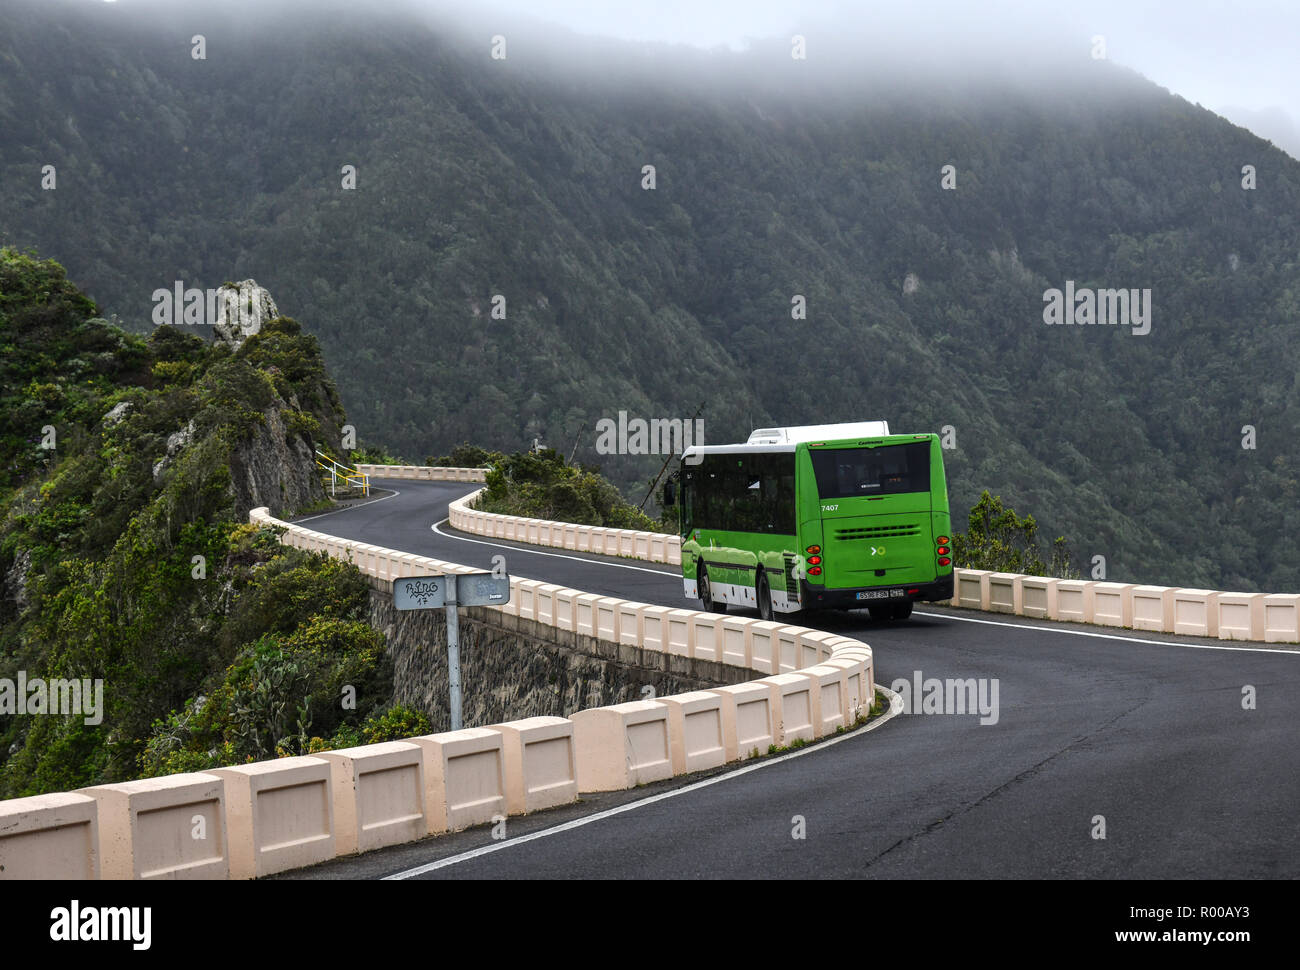 Spain; Canary Islands: Tenerife. Bus on a mountain road in the Anaga National Park. Top of mountains in the fog. *** Local Caption *** Stock Photo